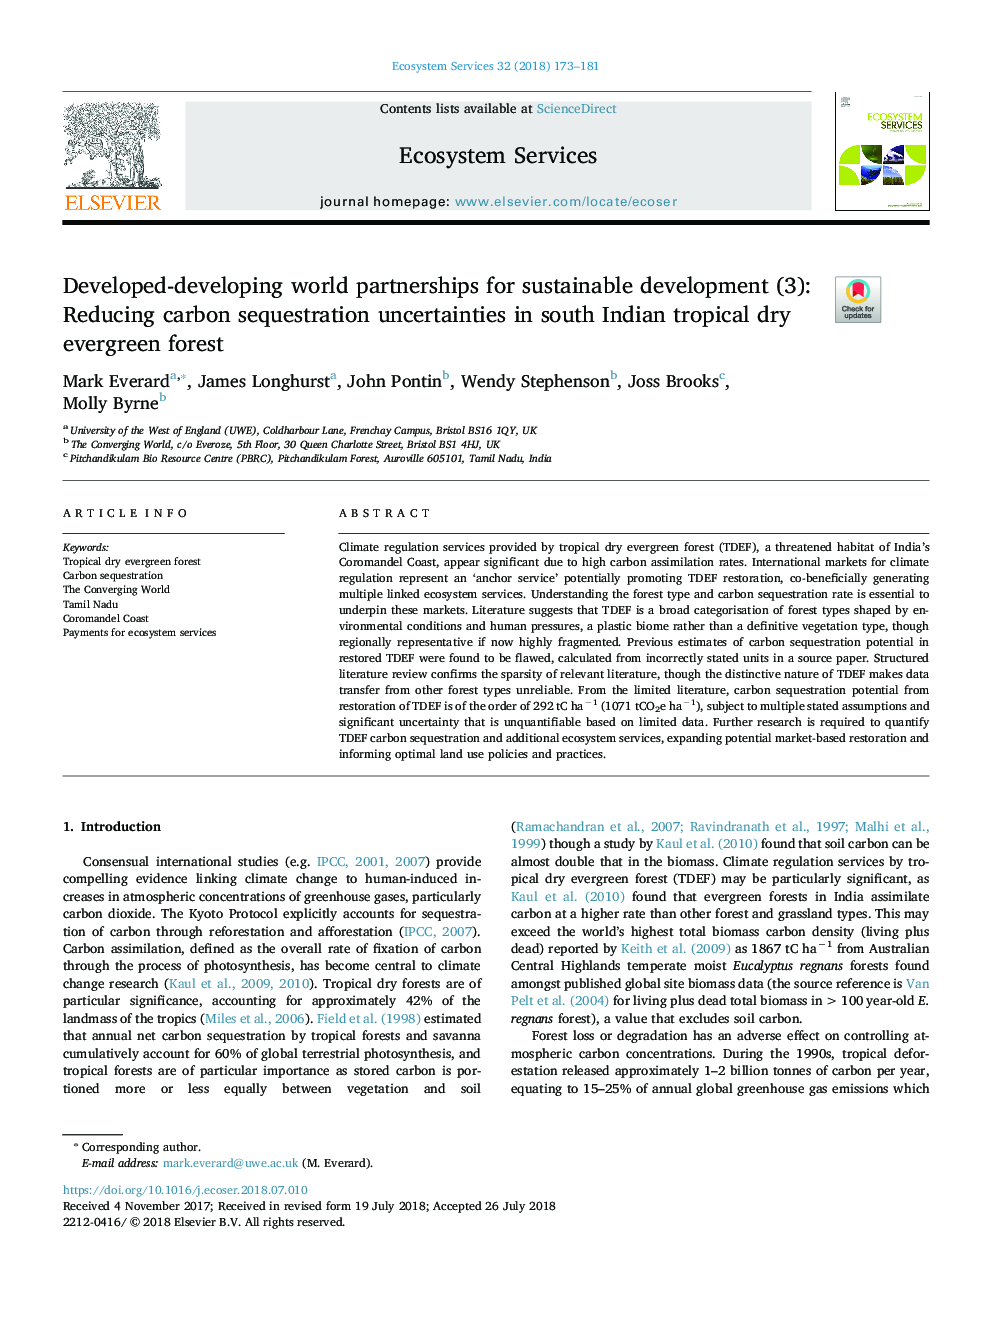 Developed-developing world partnerships for sustainable development (3): Reducing carbon sequestration uncertainties in south Indian tropical dry evergreen forest